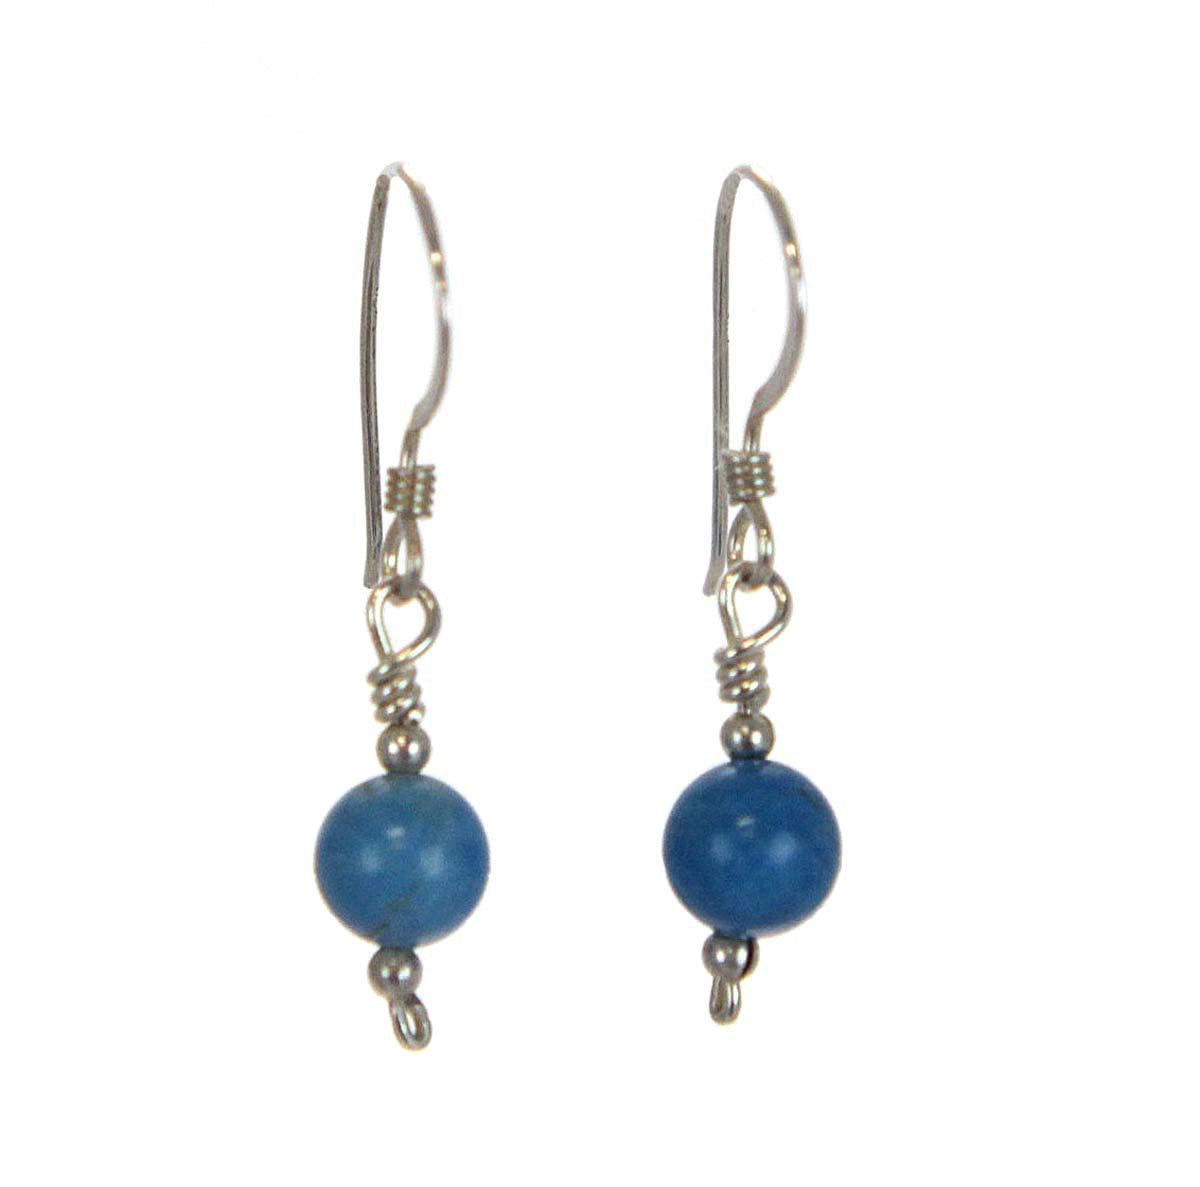 Turquoise Bead Earrings Sterling Silver